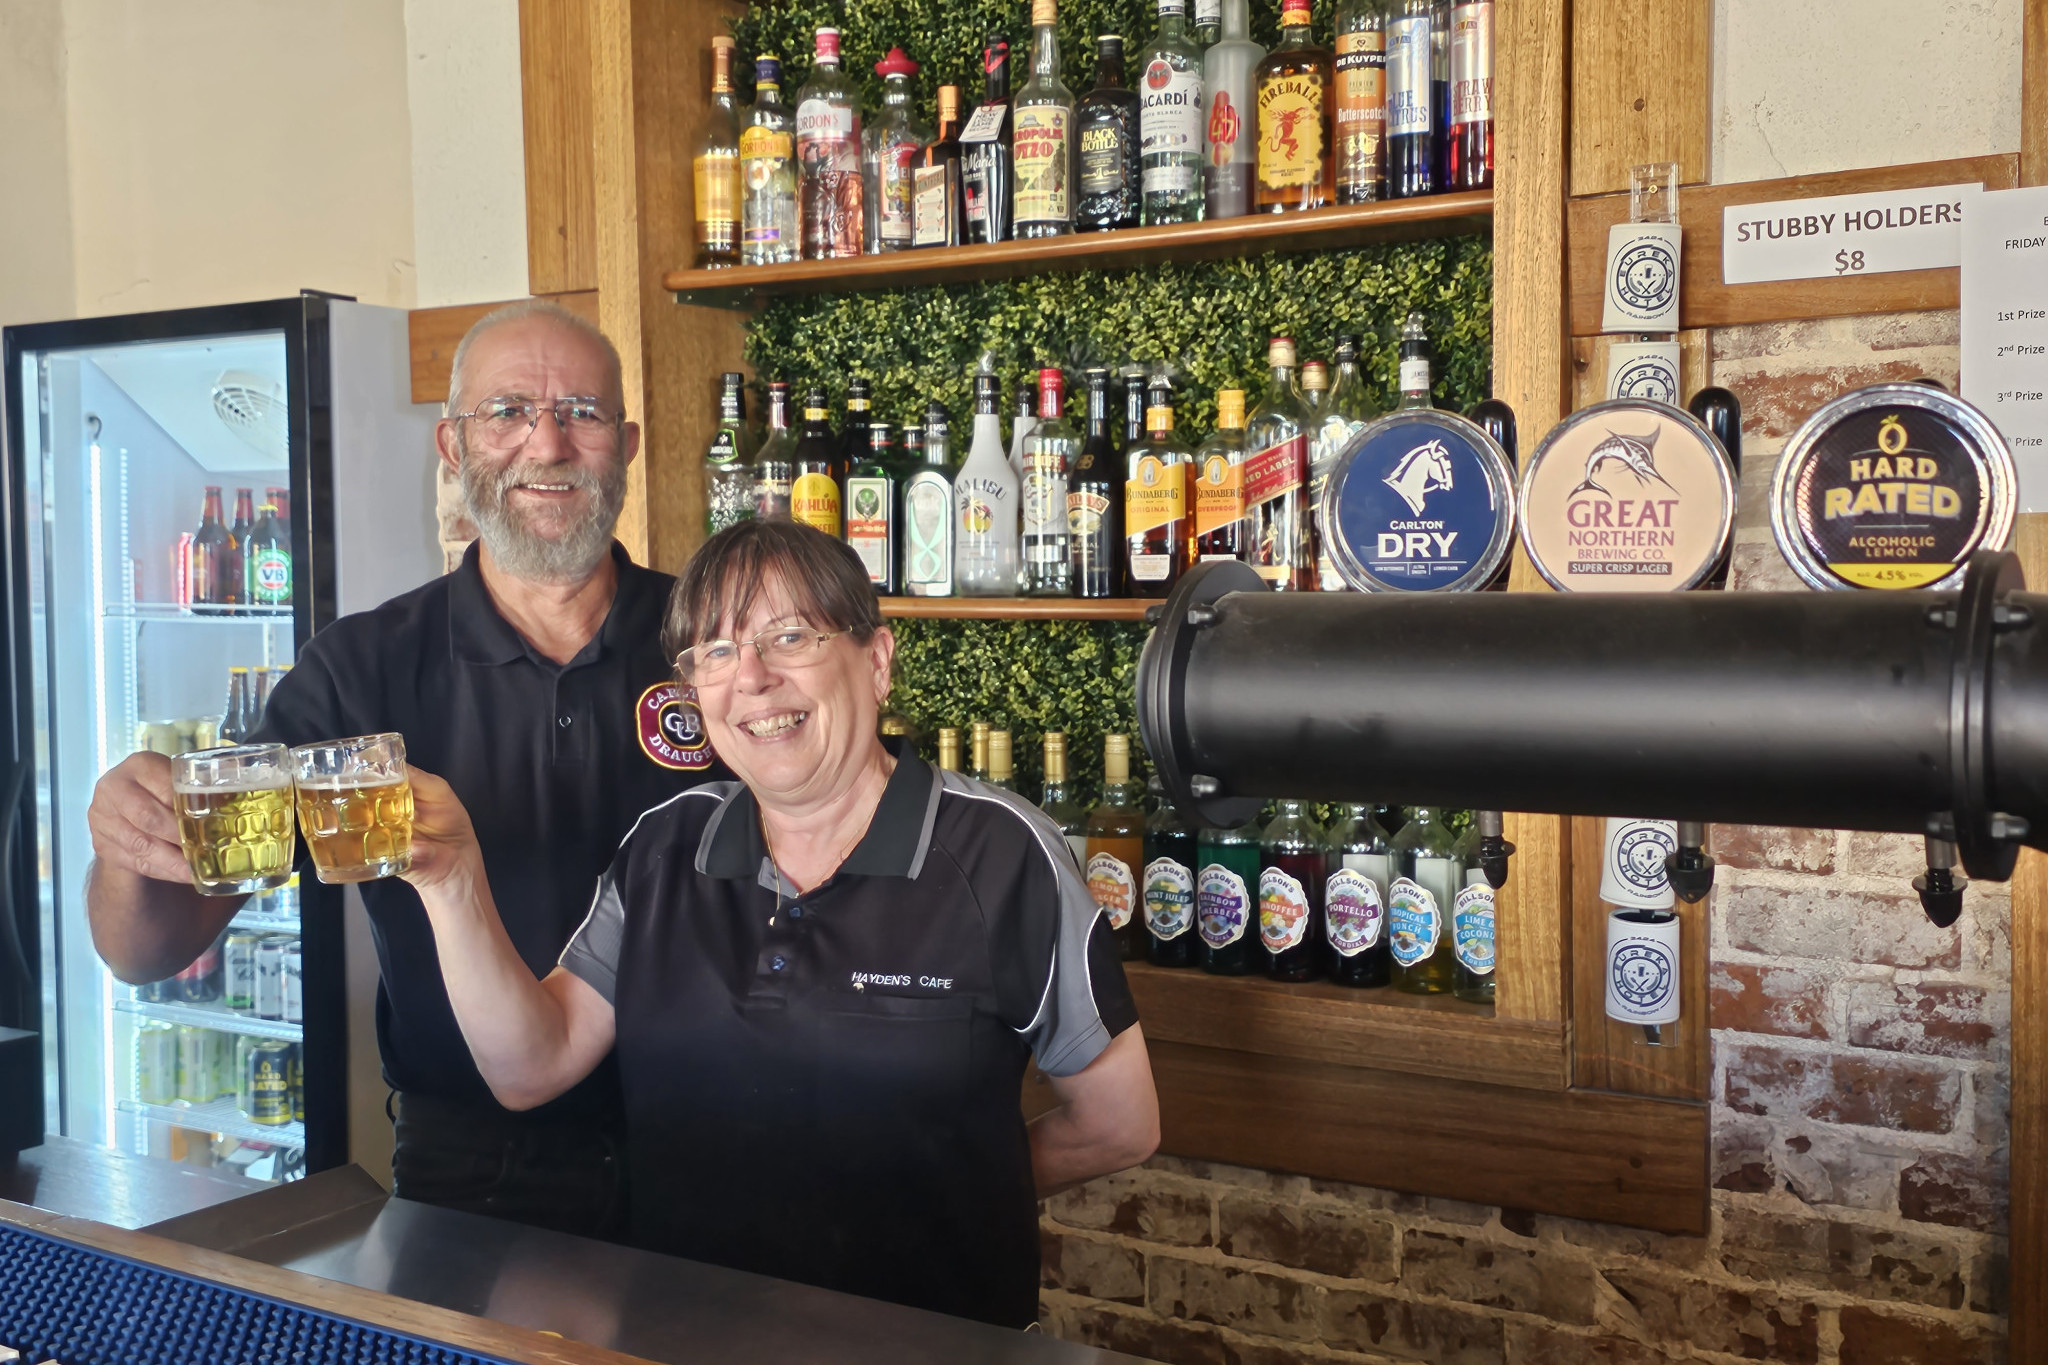 Peter and Sharon Hayden are celebrating their business' first birthday and, on page 4, look forward to supplying Rainbow with a wealth of foods and drinks for many years to come.